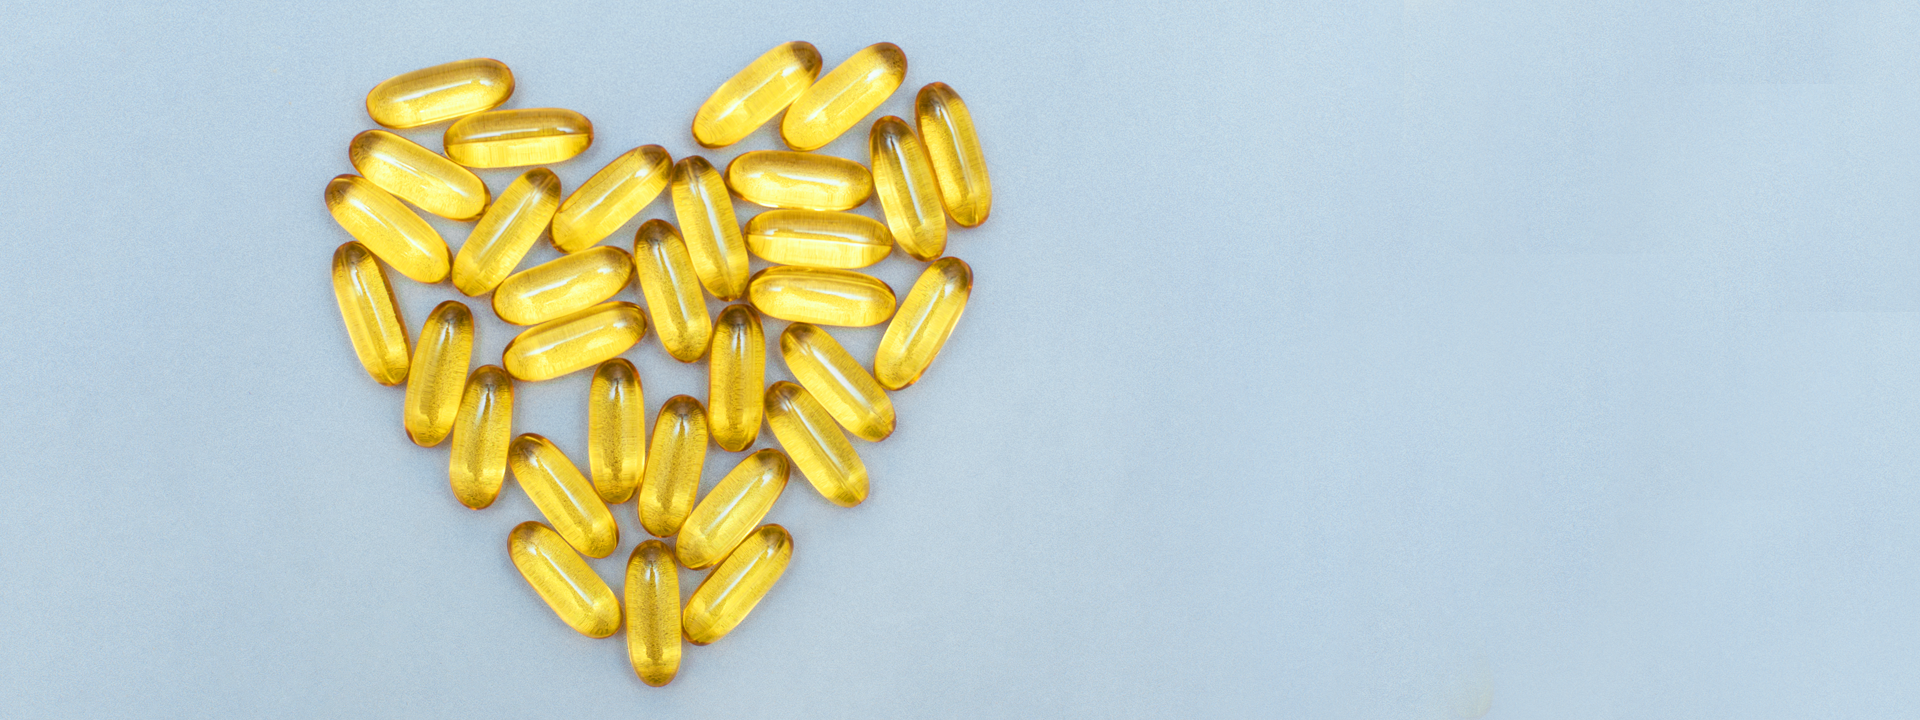 Heart Disease: A Role for Omega-3 Fatty Acid Supplements?